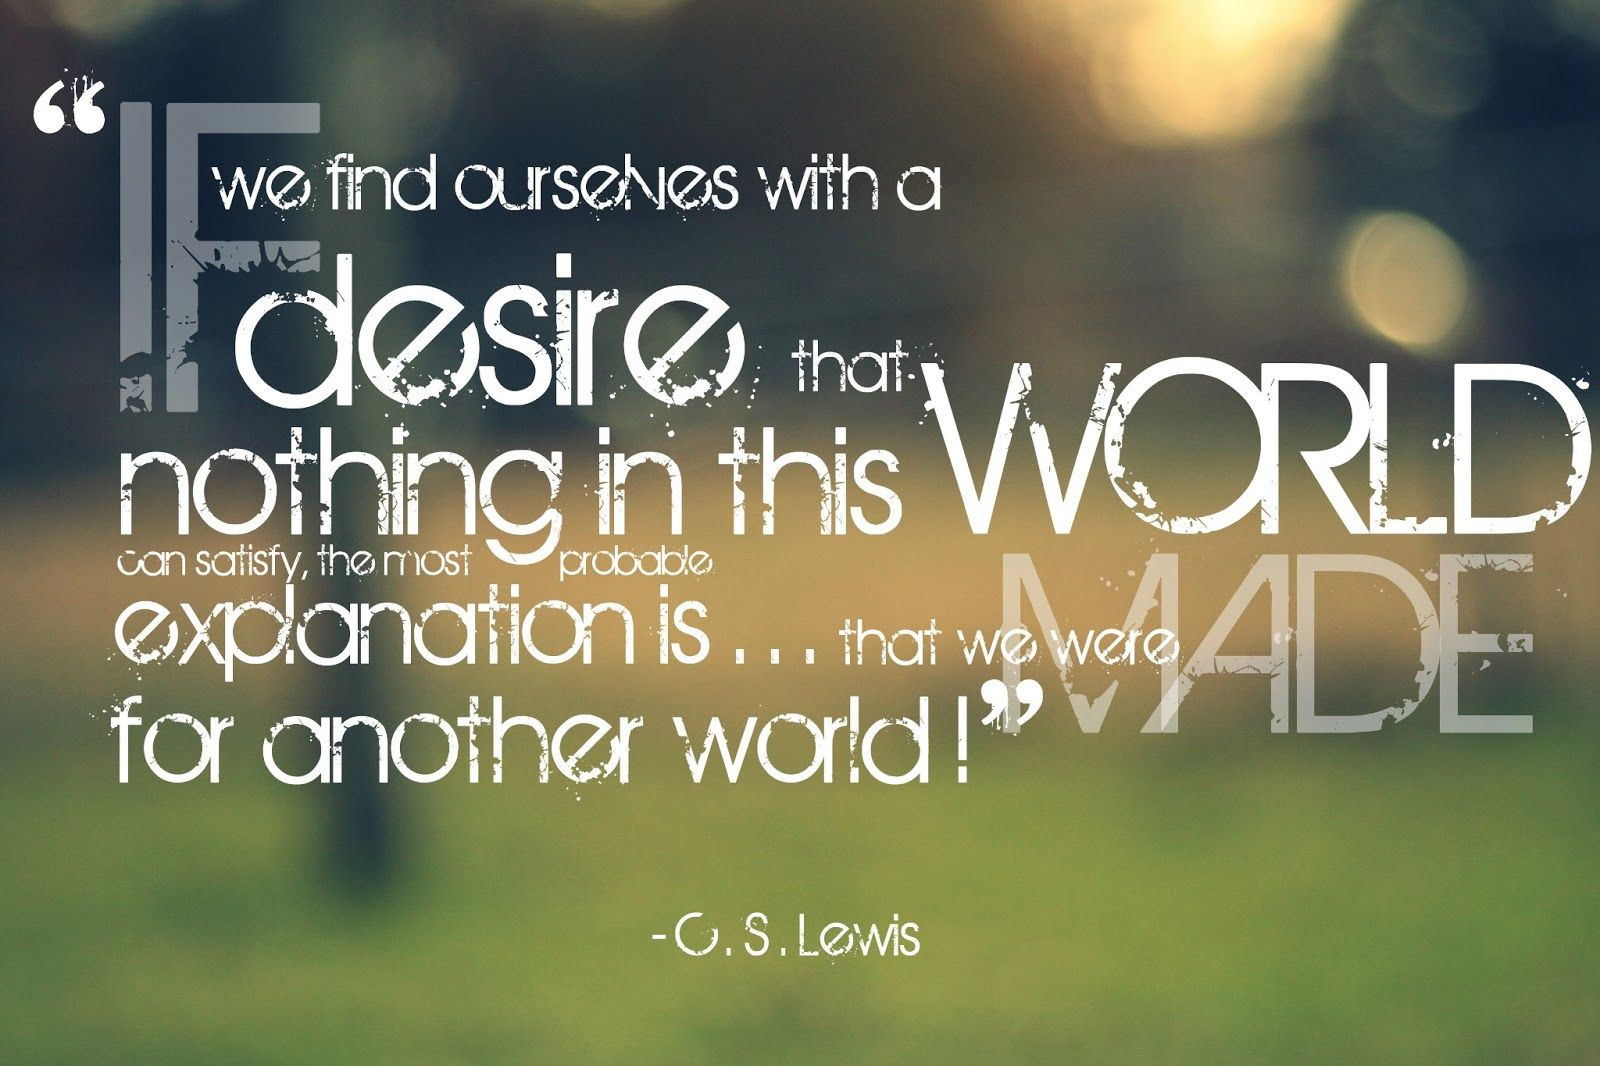 C.S Lewis Christmas Quotes
 From C S Lewis Quotes QuotesGram